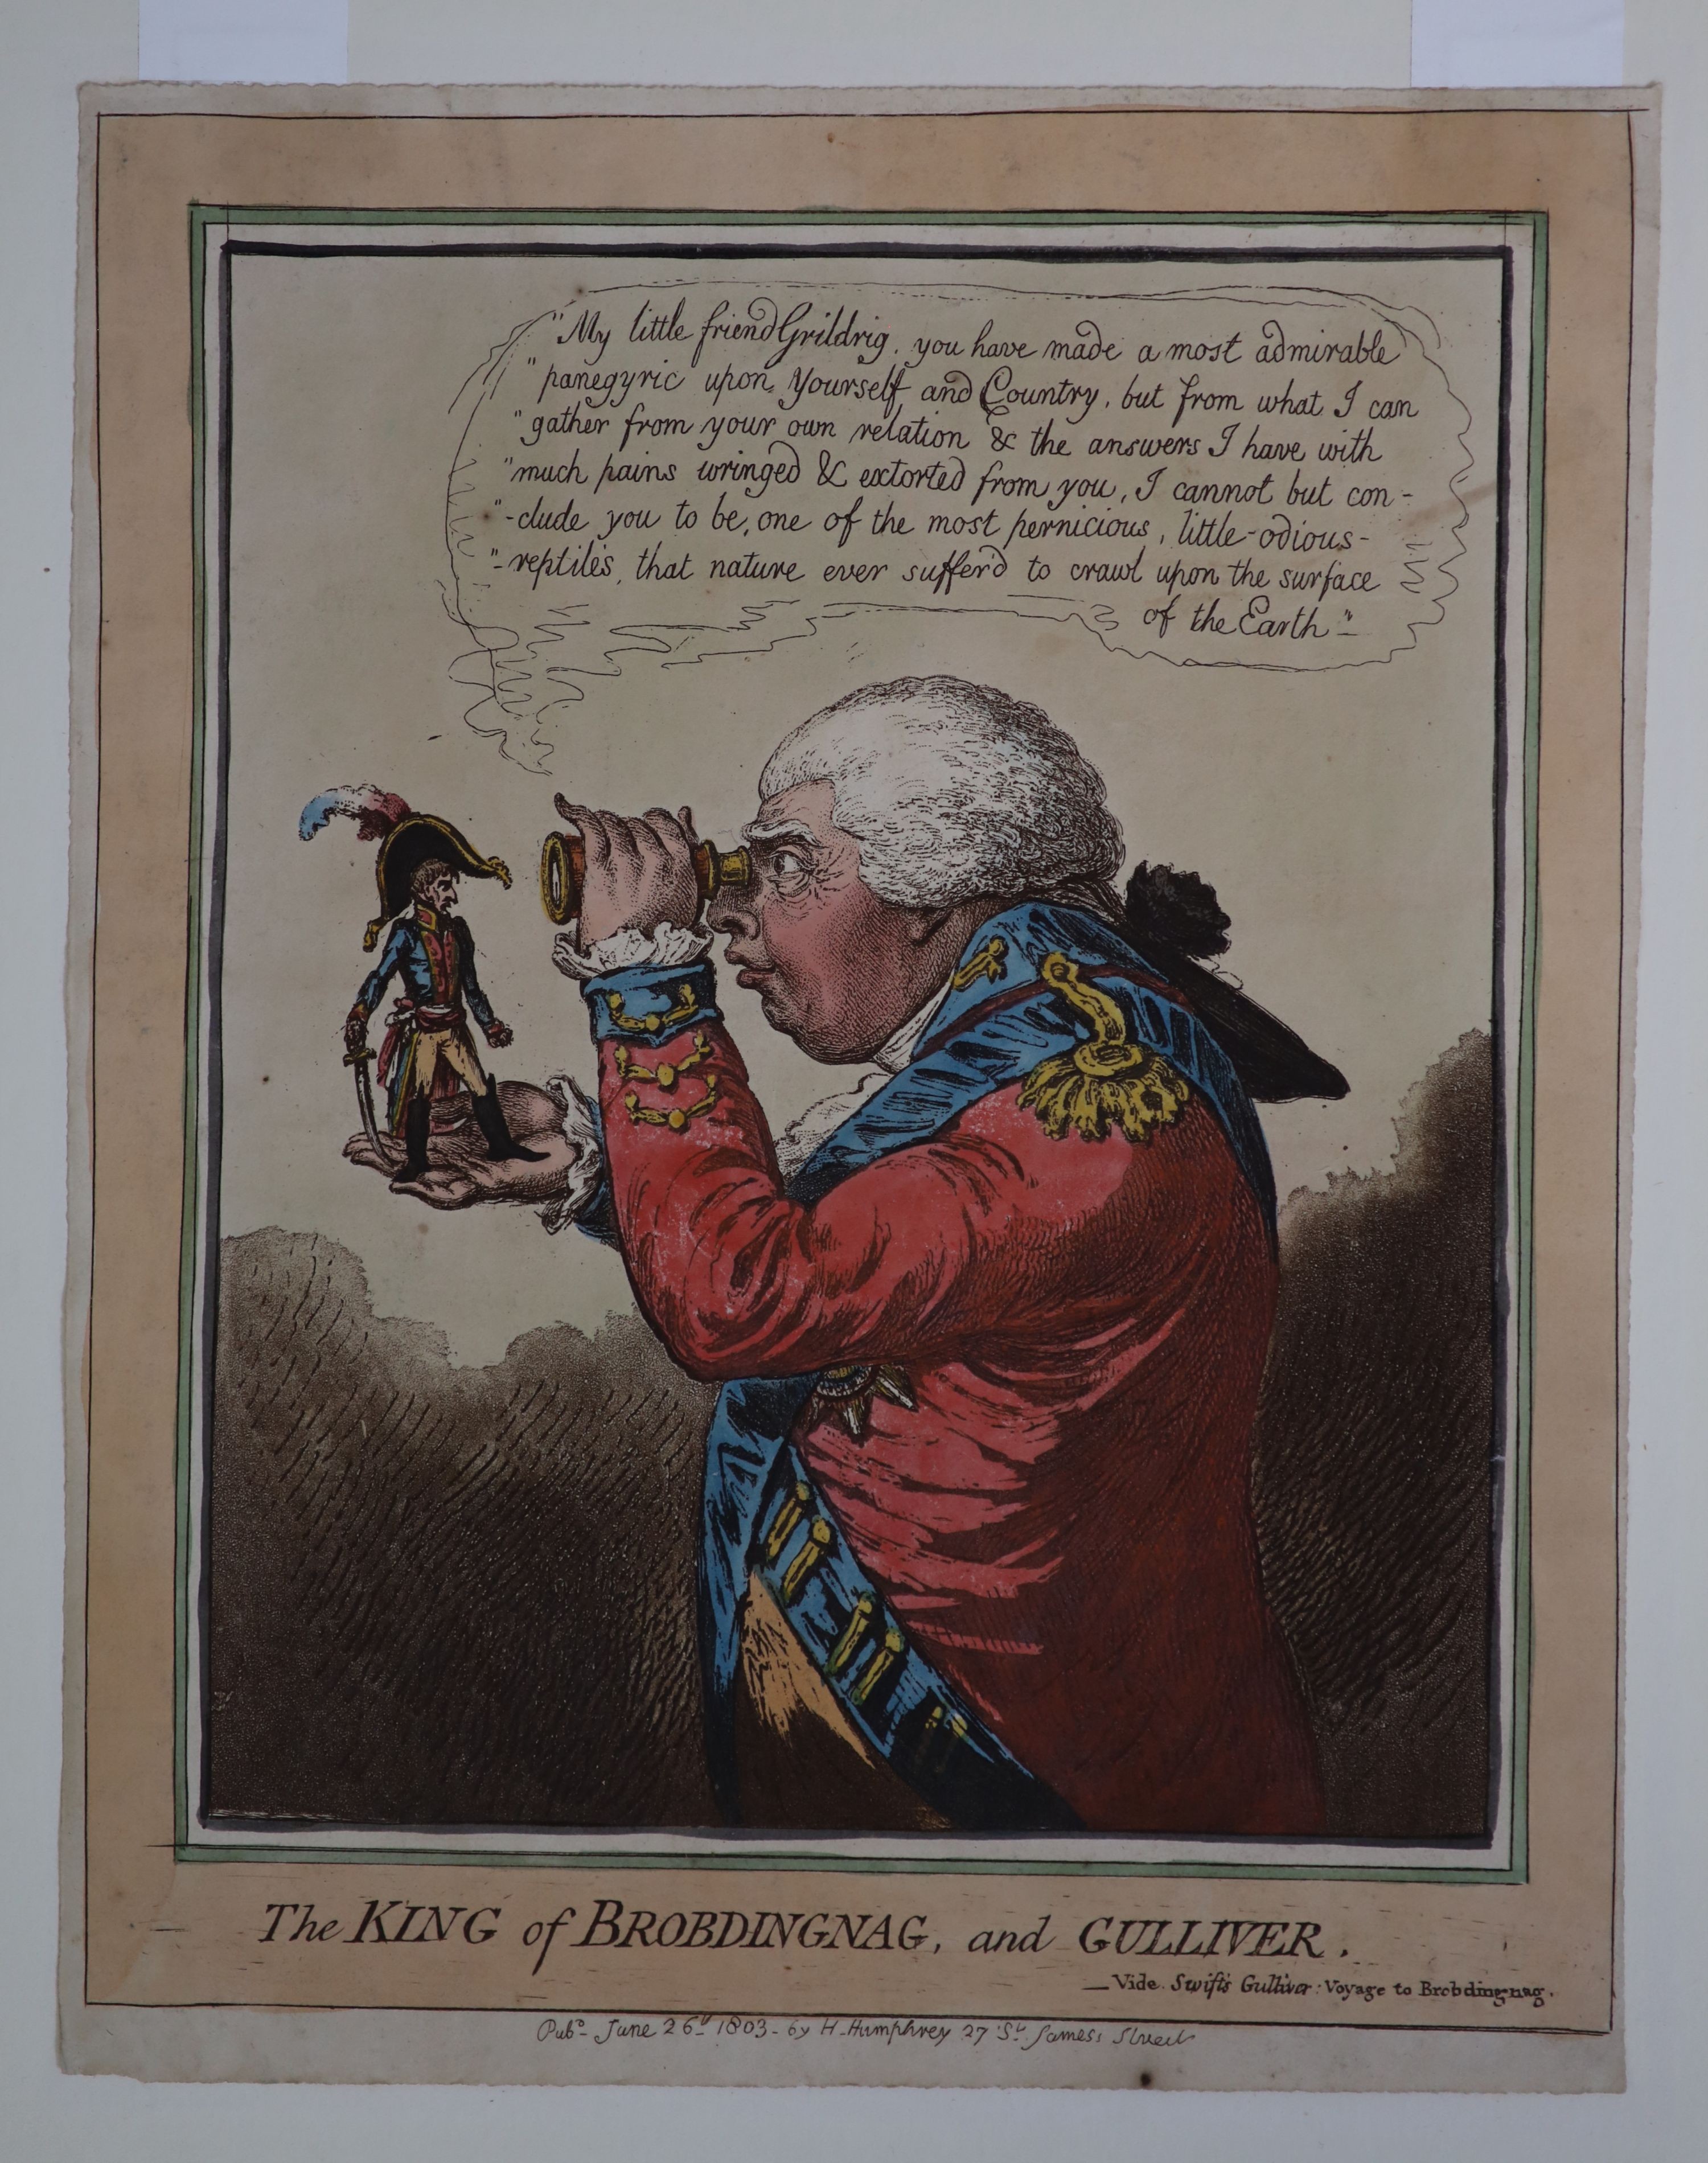 James Gillray (1757-1815), New Morality, The Bishop of A Tun’s Breeches, Making Decent, Frying Sprats/Toasting Muffins, The King of Brobdingnag, Charlotte la Corde, The Reception of the Diplomatique, The State Waggoner,